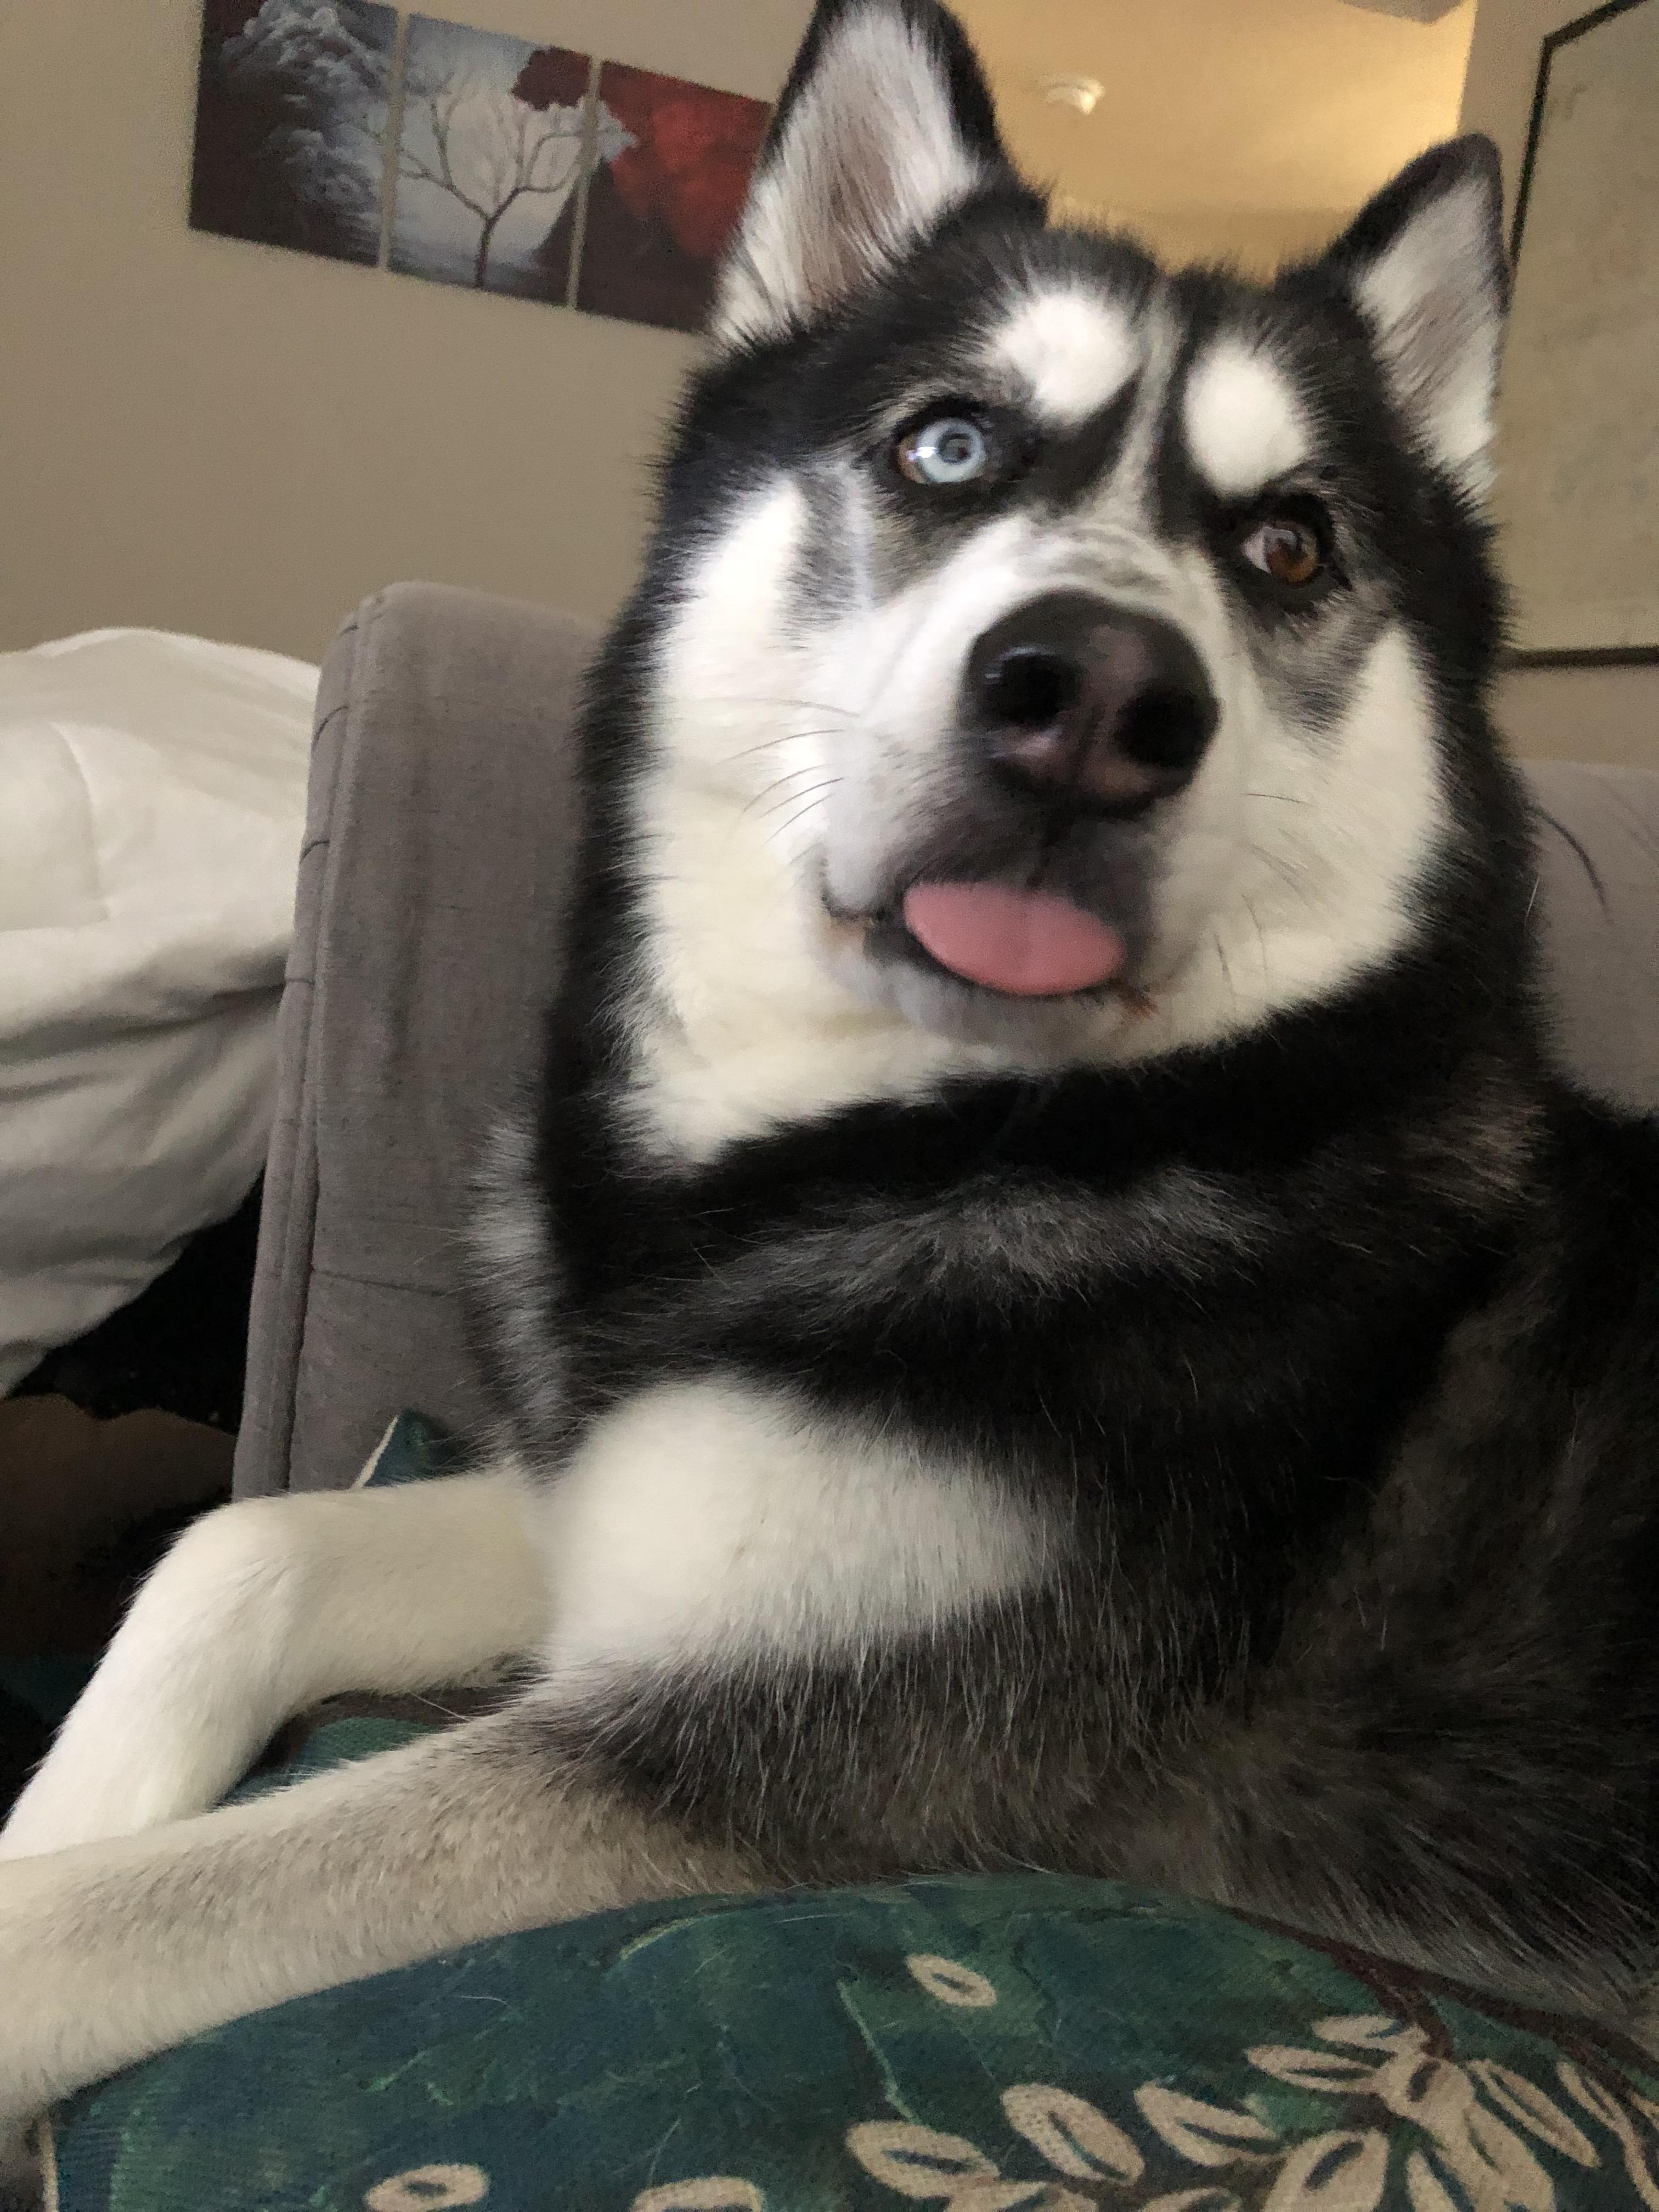 Husky lying on the couch while looking up with its tongue out